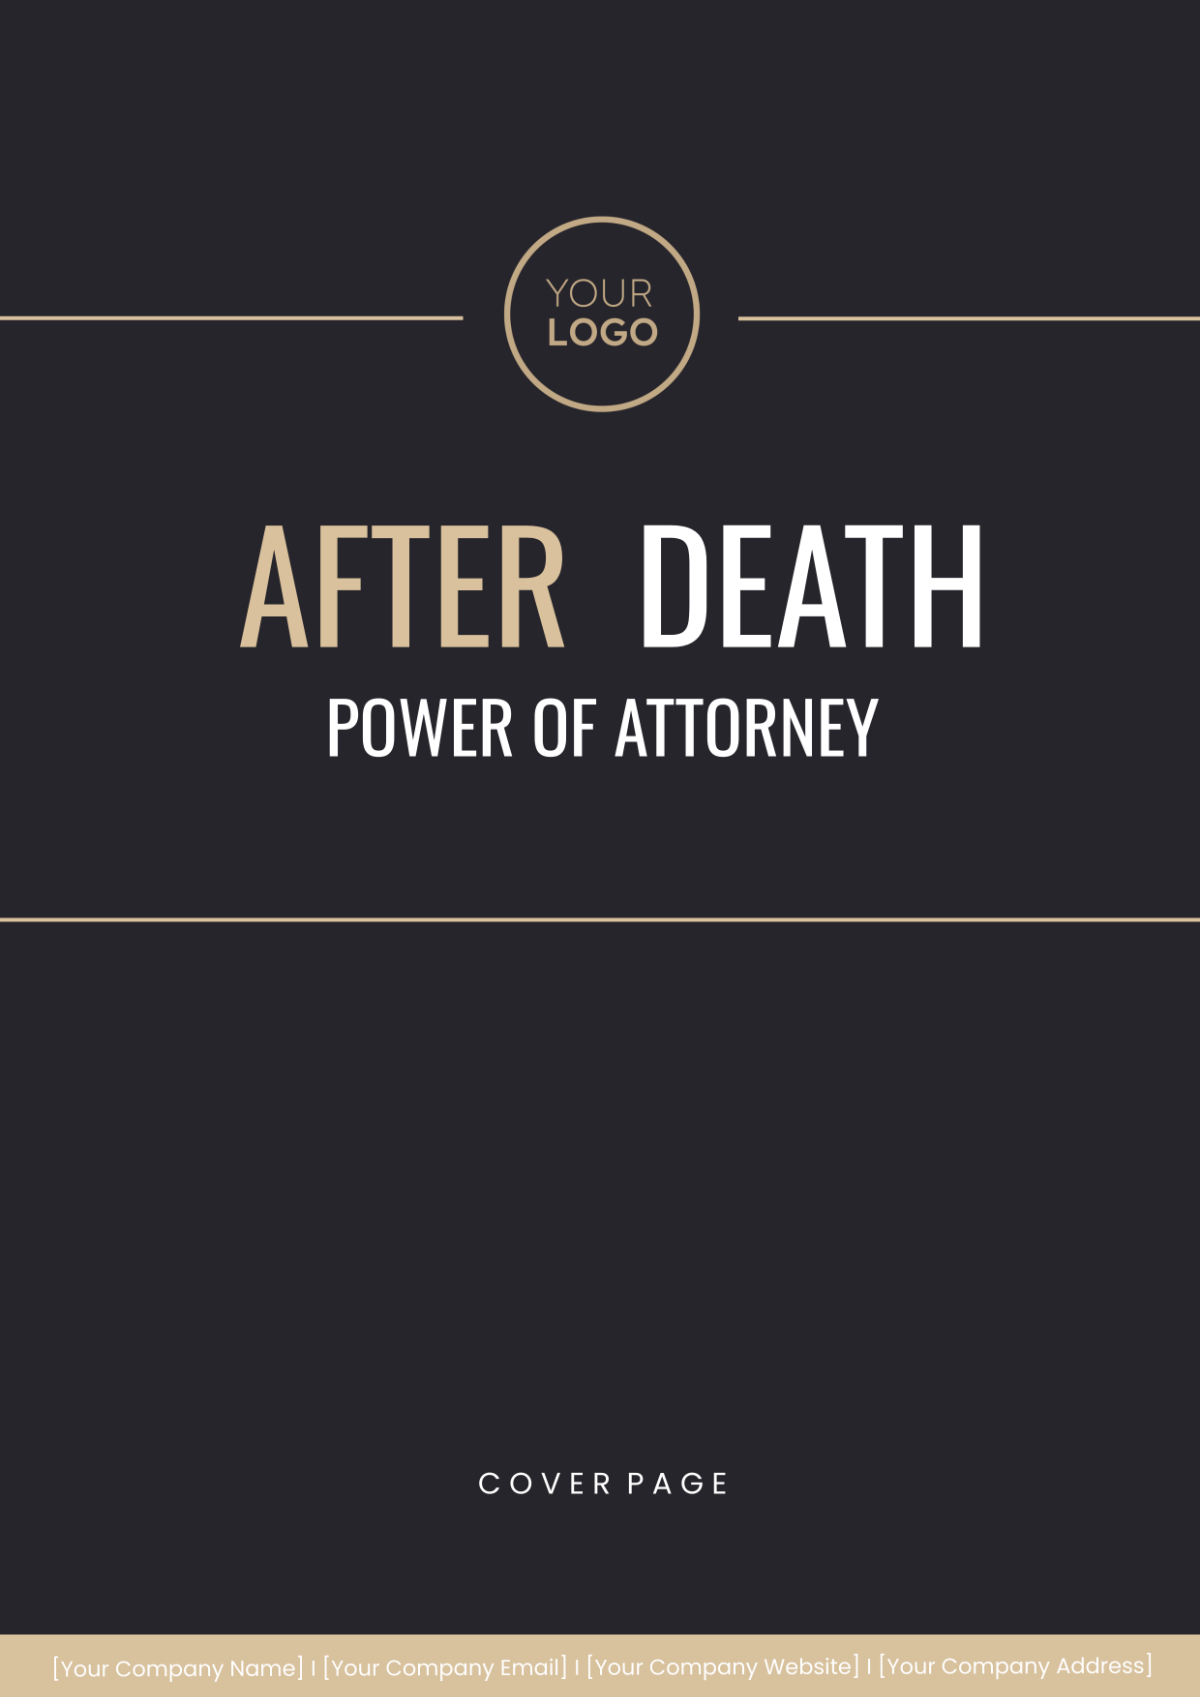 Power of Attorney After Death Cover Page